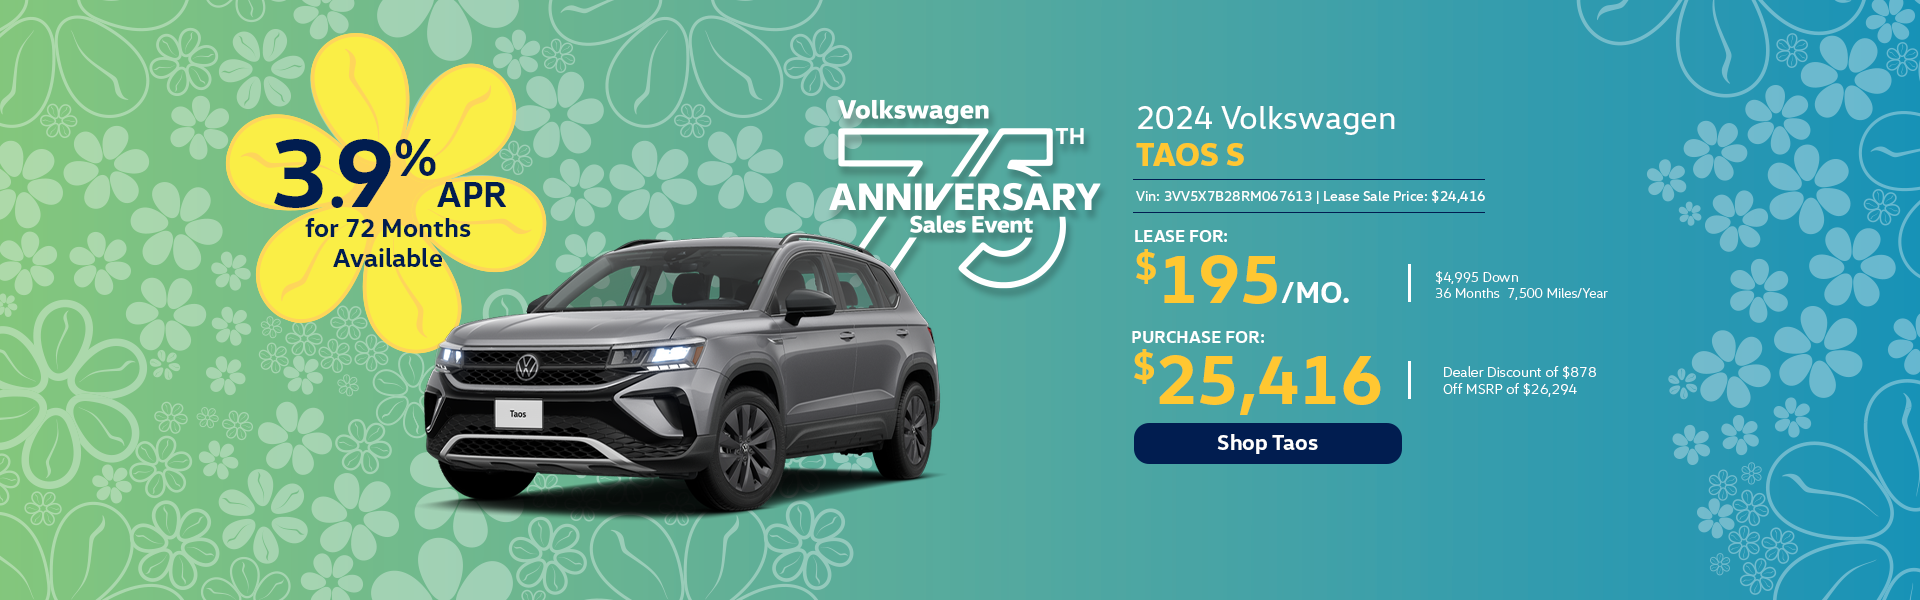 VW Taos Special Offer in Hanover, MA